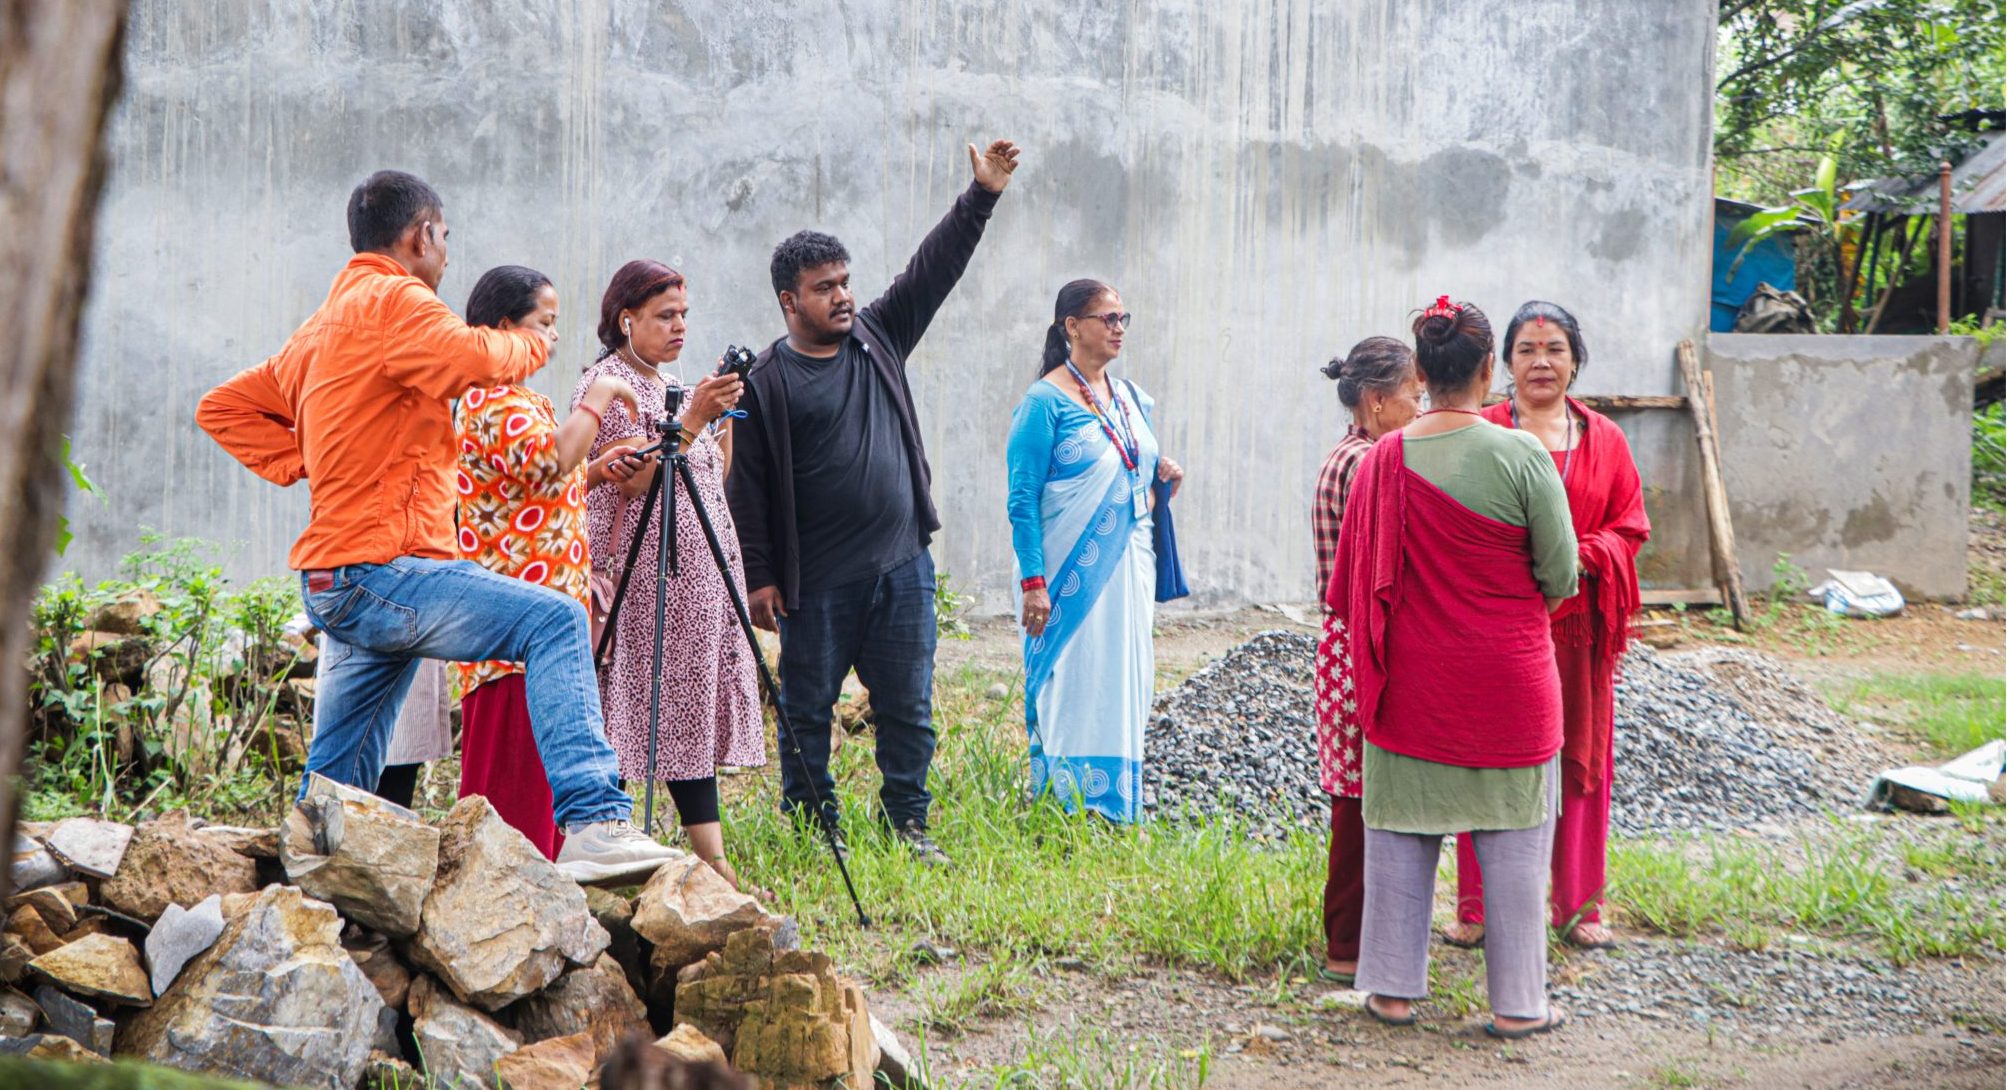 A Nepali man in black stands with his arm raised to some in the distance while a group of female health workers stand around a camera on a tripod